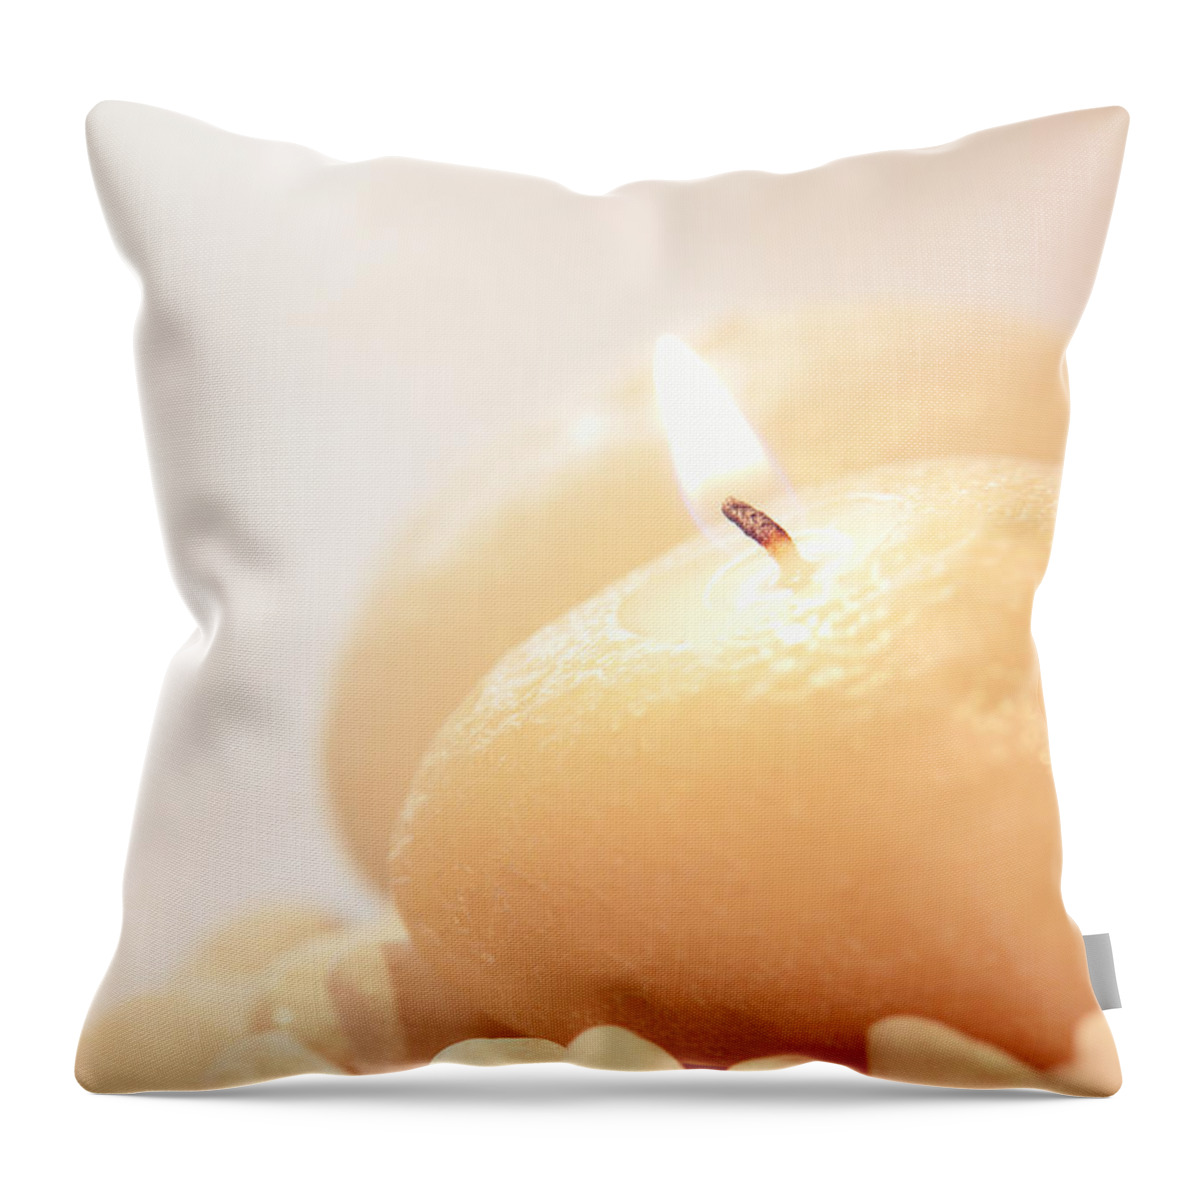 Ambience Throw Pillow featuring the photograph Round Aromatherapy Candle Burning by Olivier Le Queinec